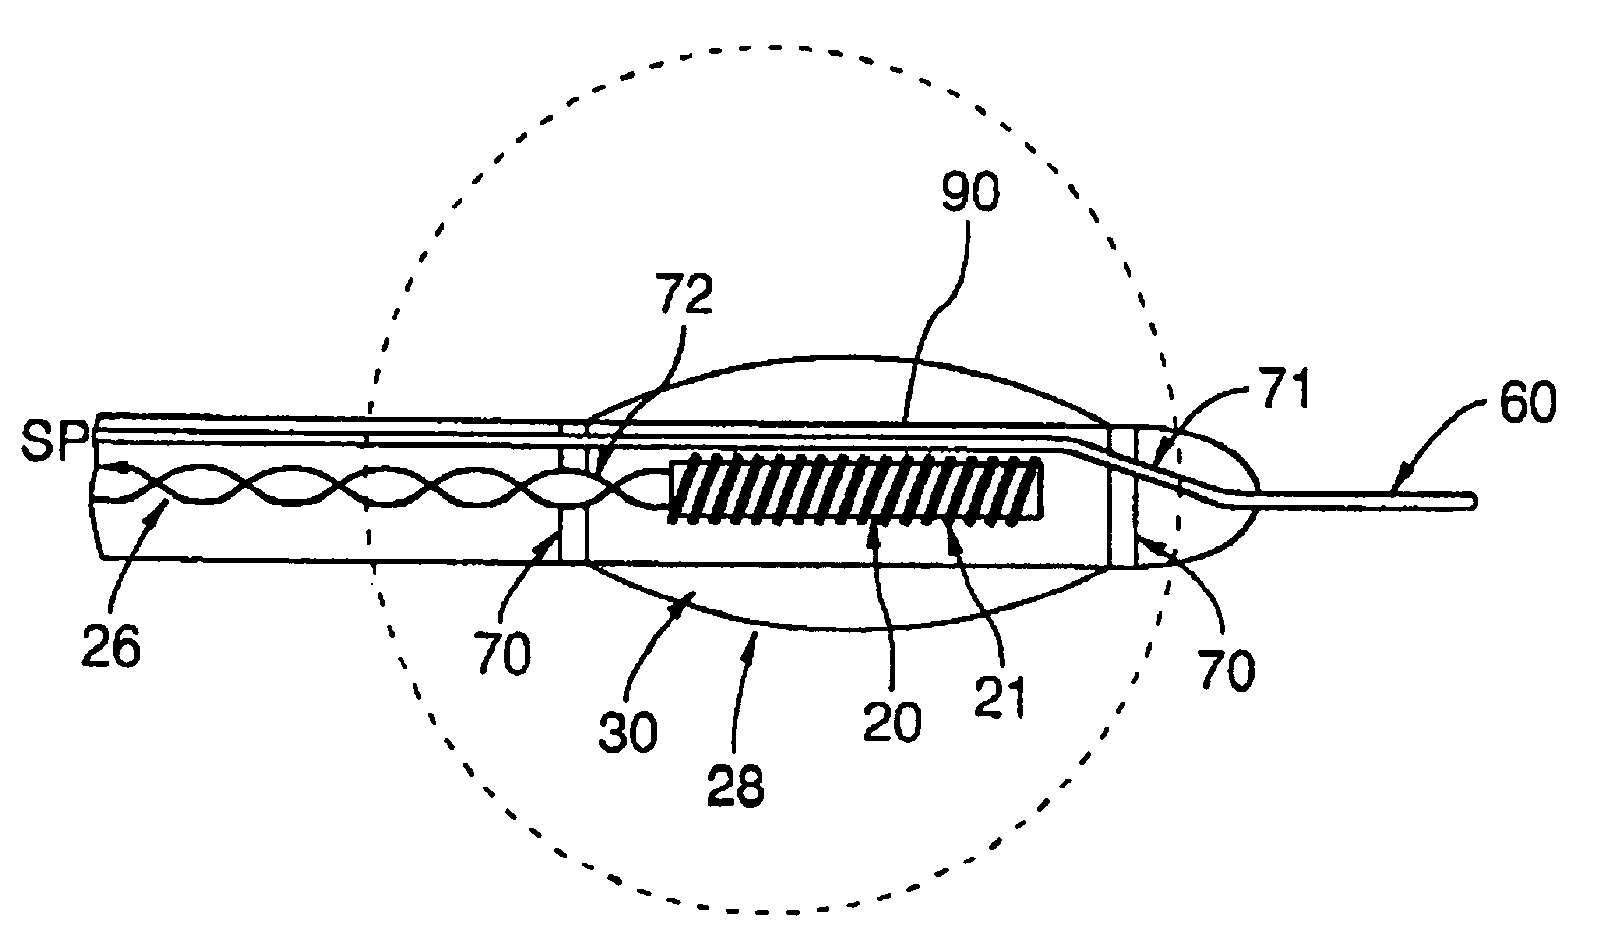 Device and method for registering a position sensor in an anatomical body